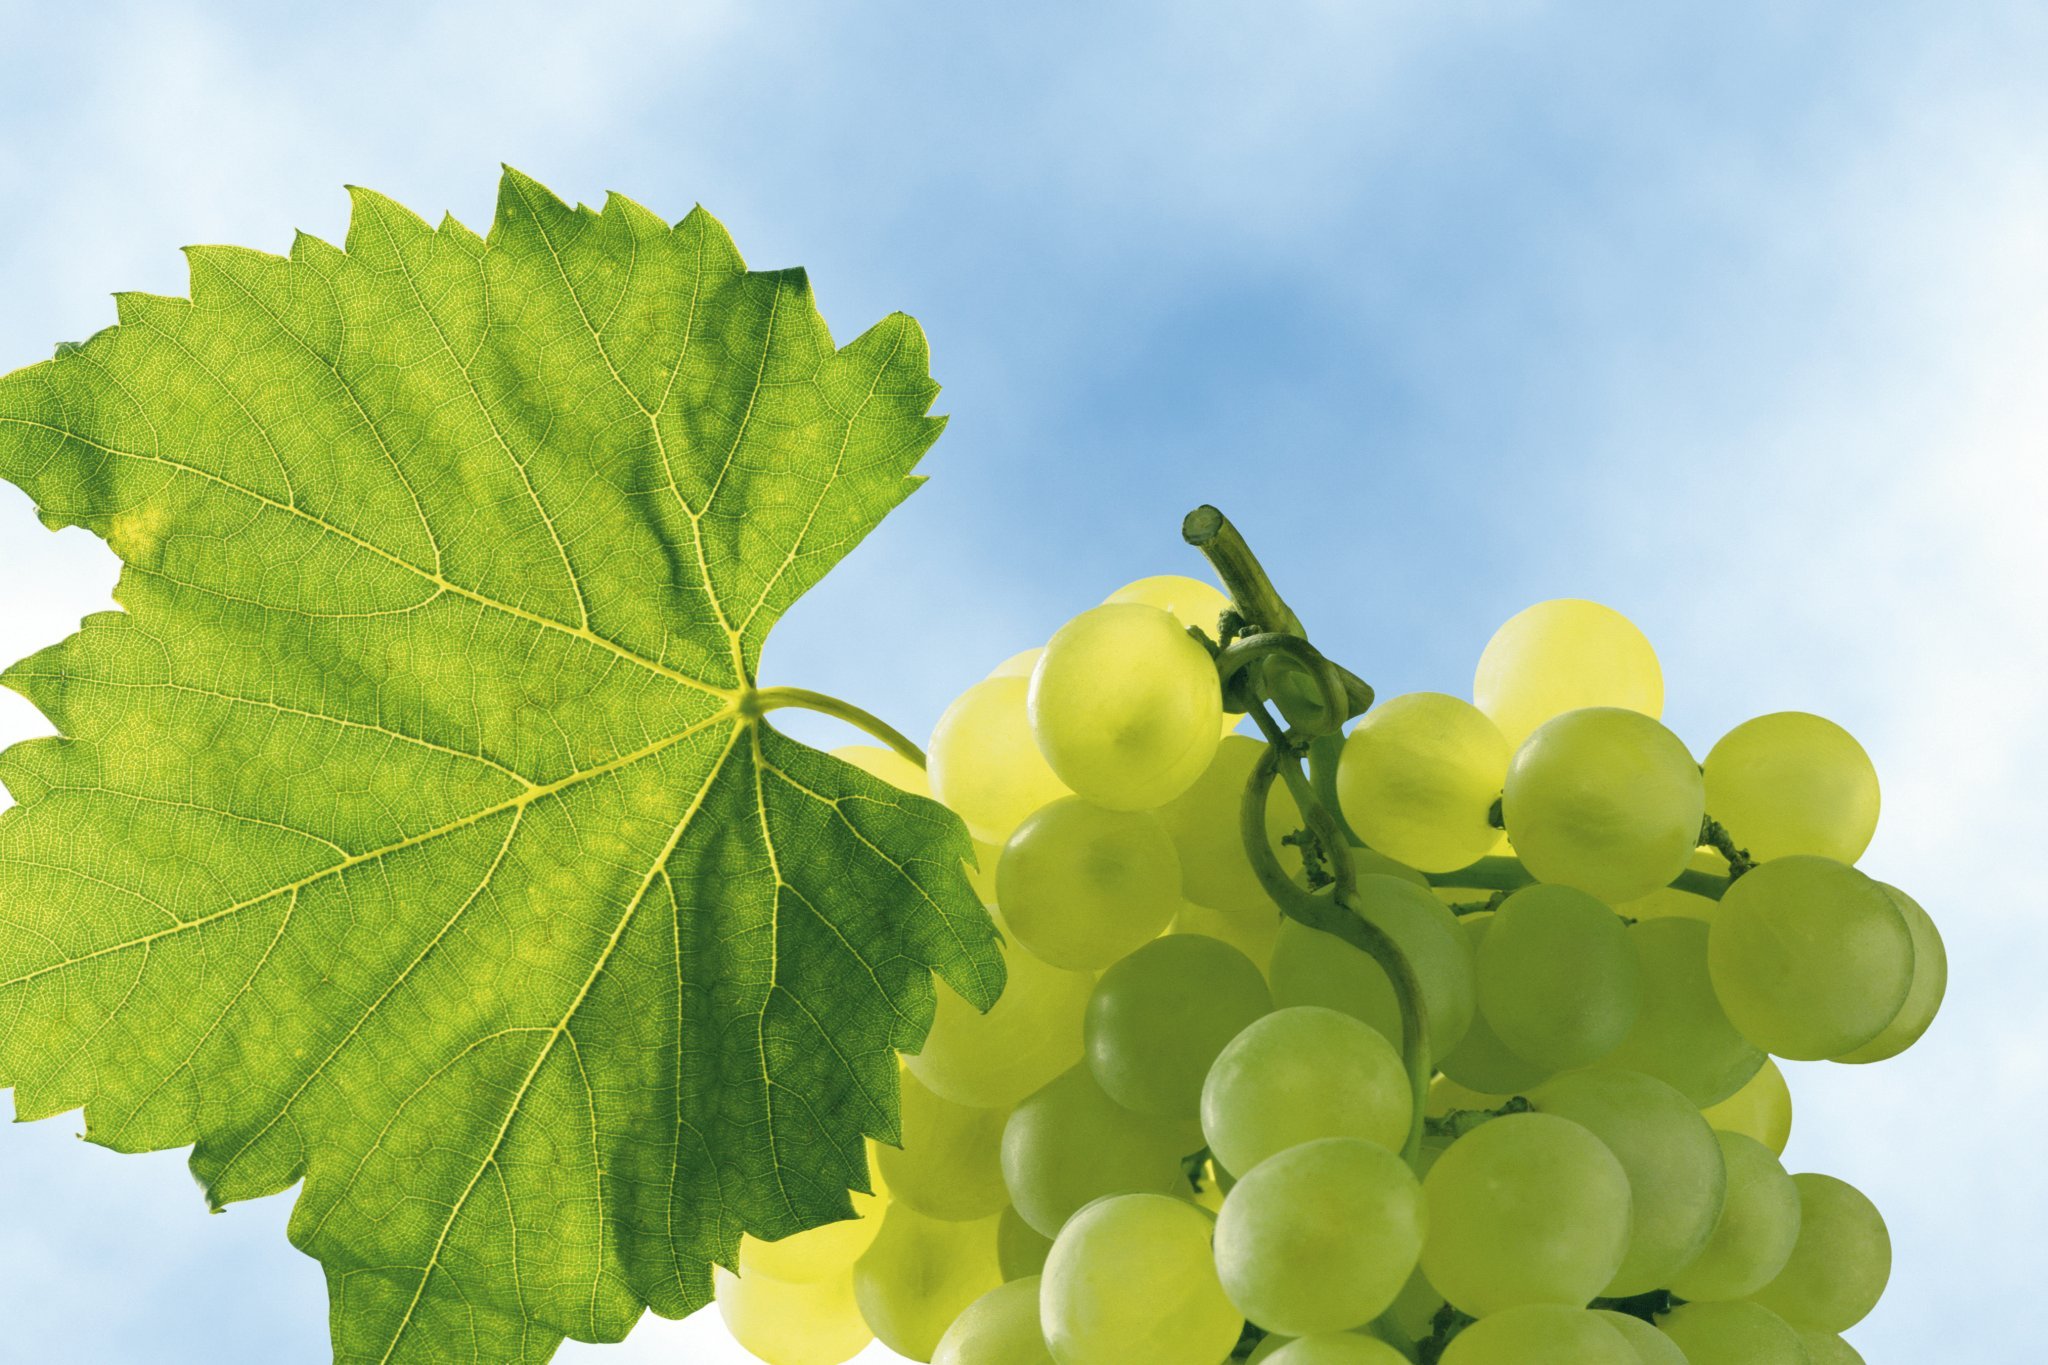 Wine grapes with green leaf, view against sky.